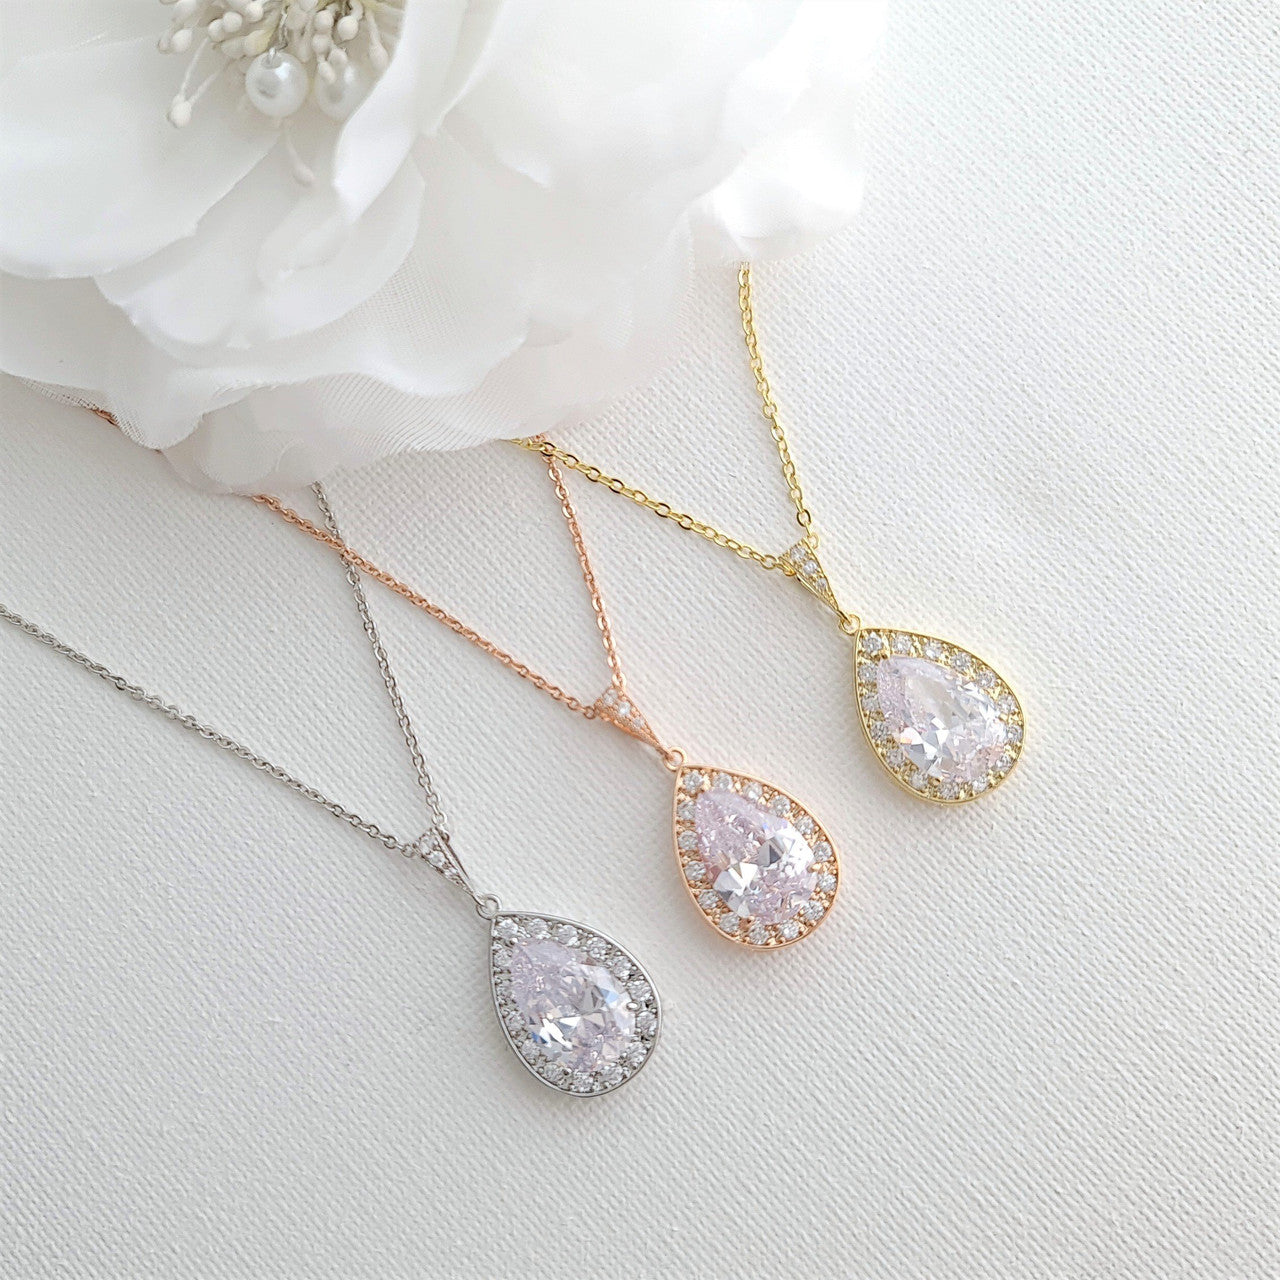 Silver, Gold, Rose Gold Teardrop Pendant Necklaces - Poetry Designs